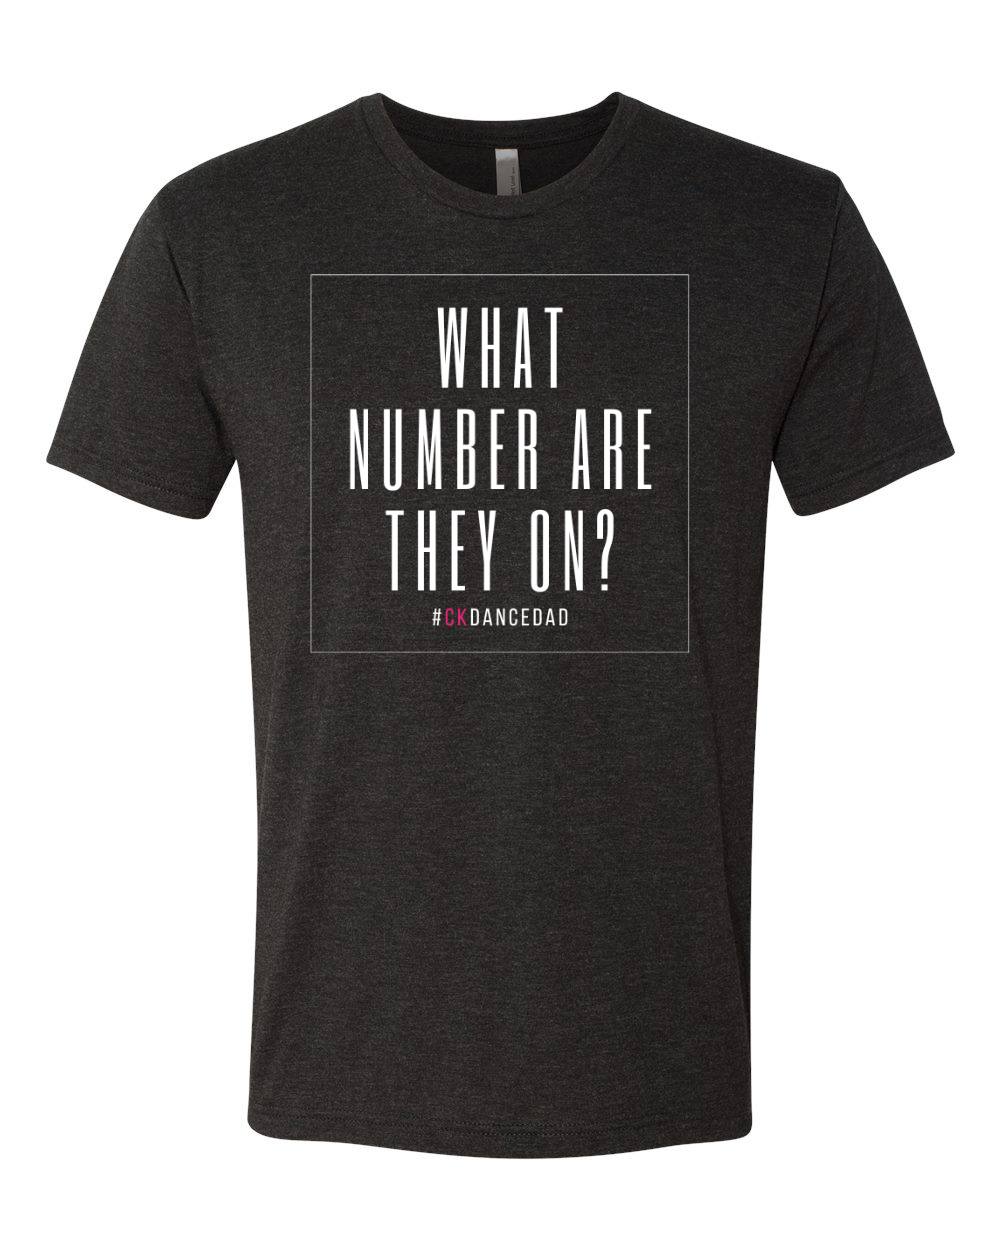 CK "What Number Are They On?" Dance Dad T-Shirt (EXTRAS)